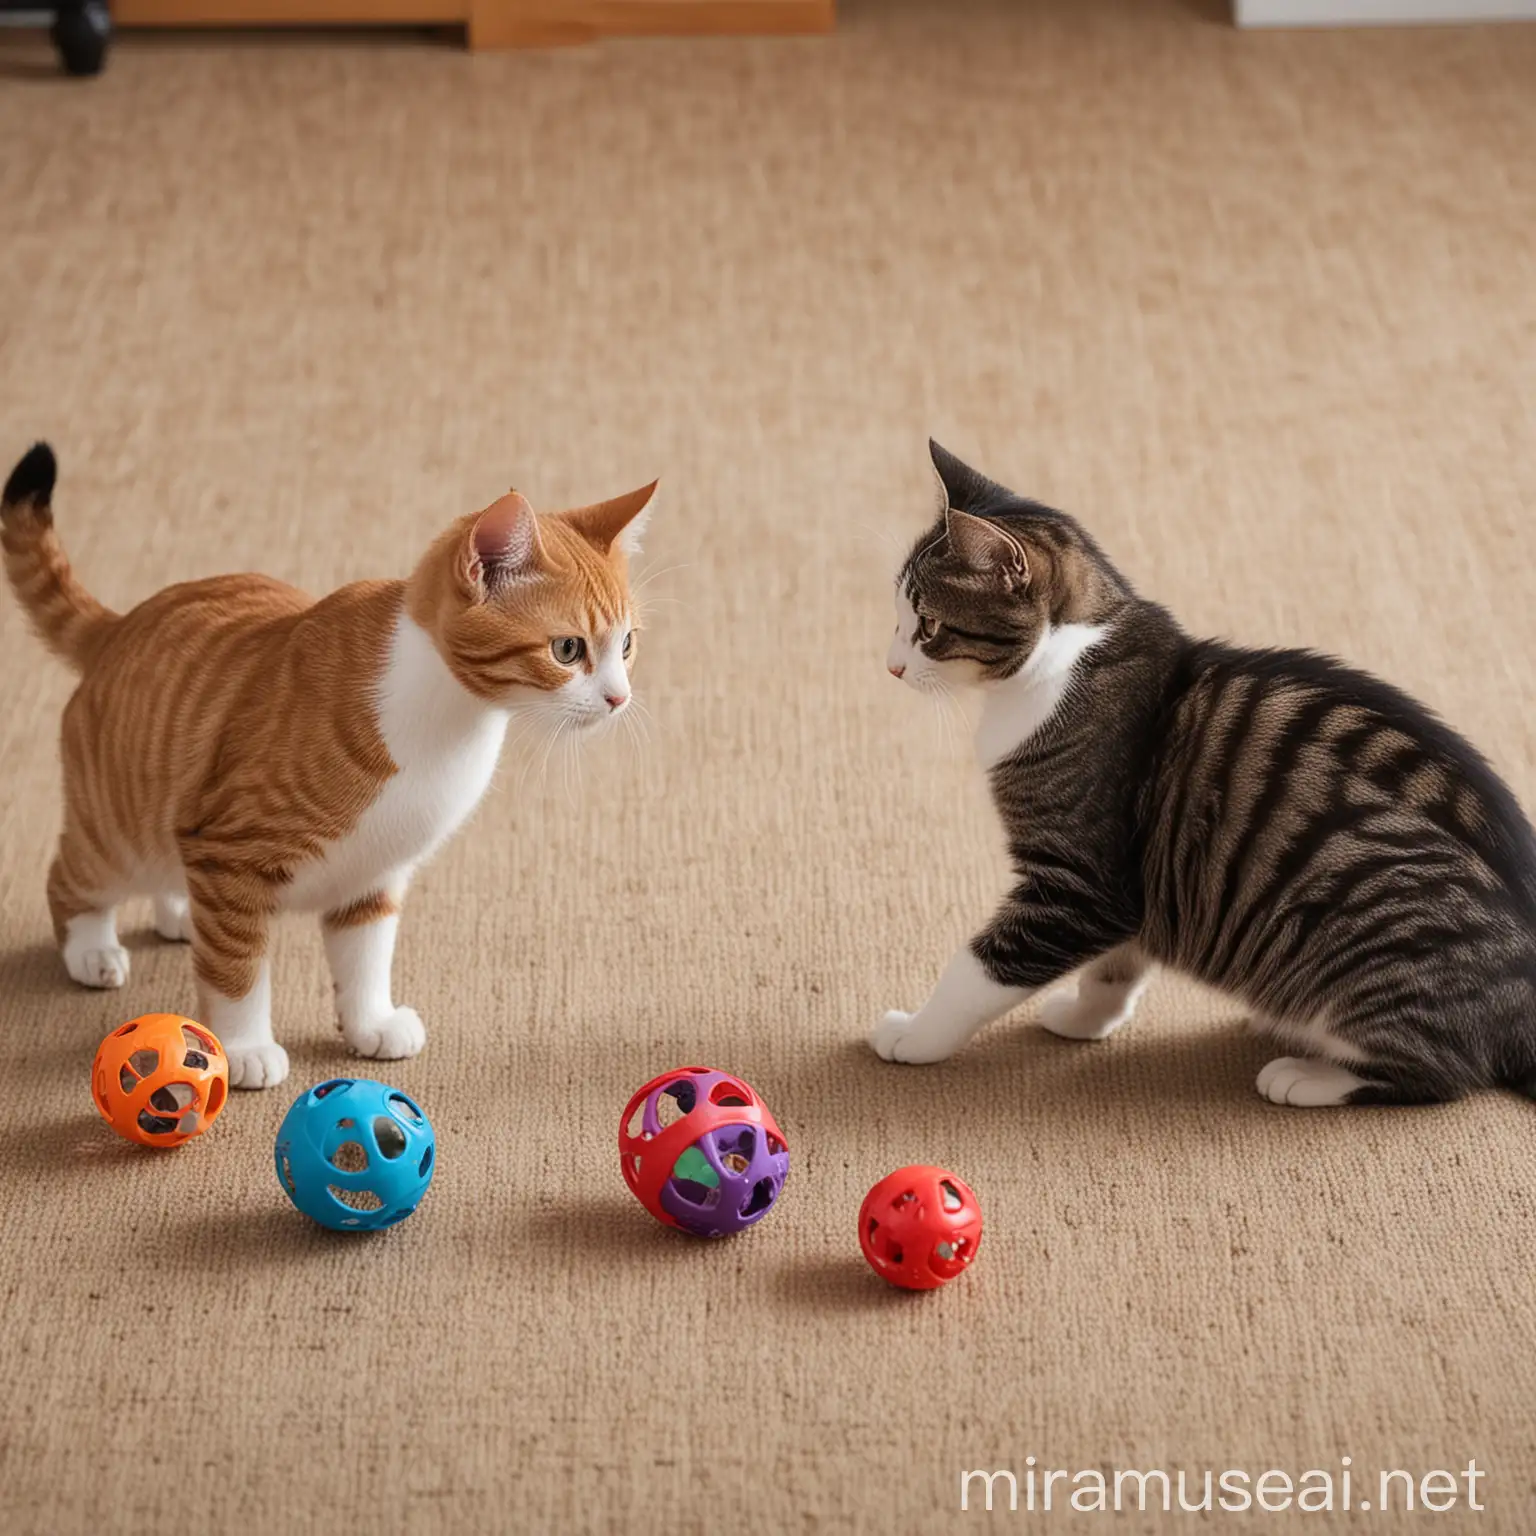 Capture clips of your cats playing with toys, chasing each other, or exploring their environment.